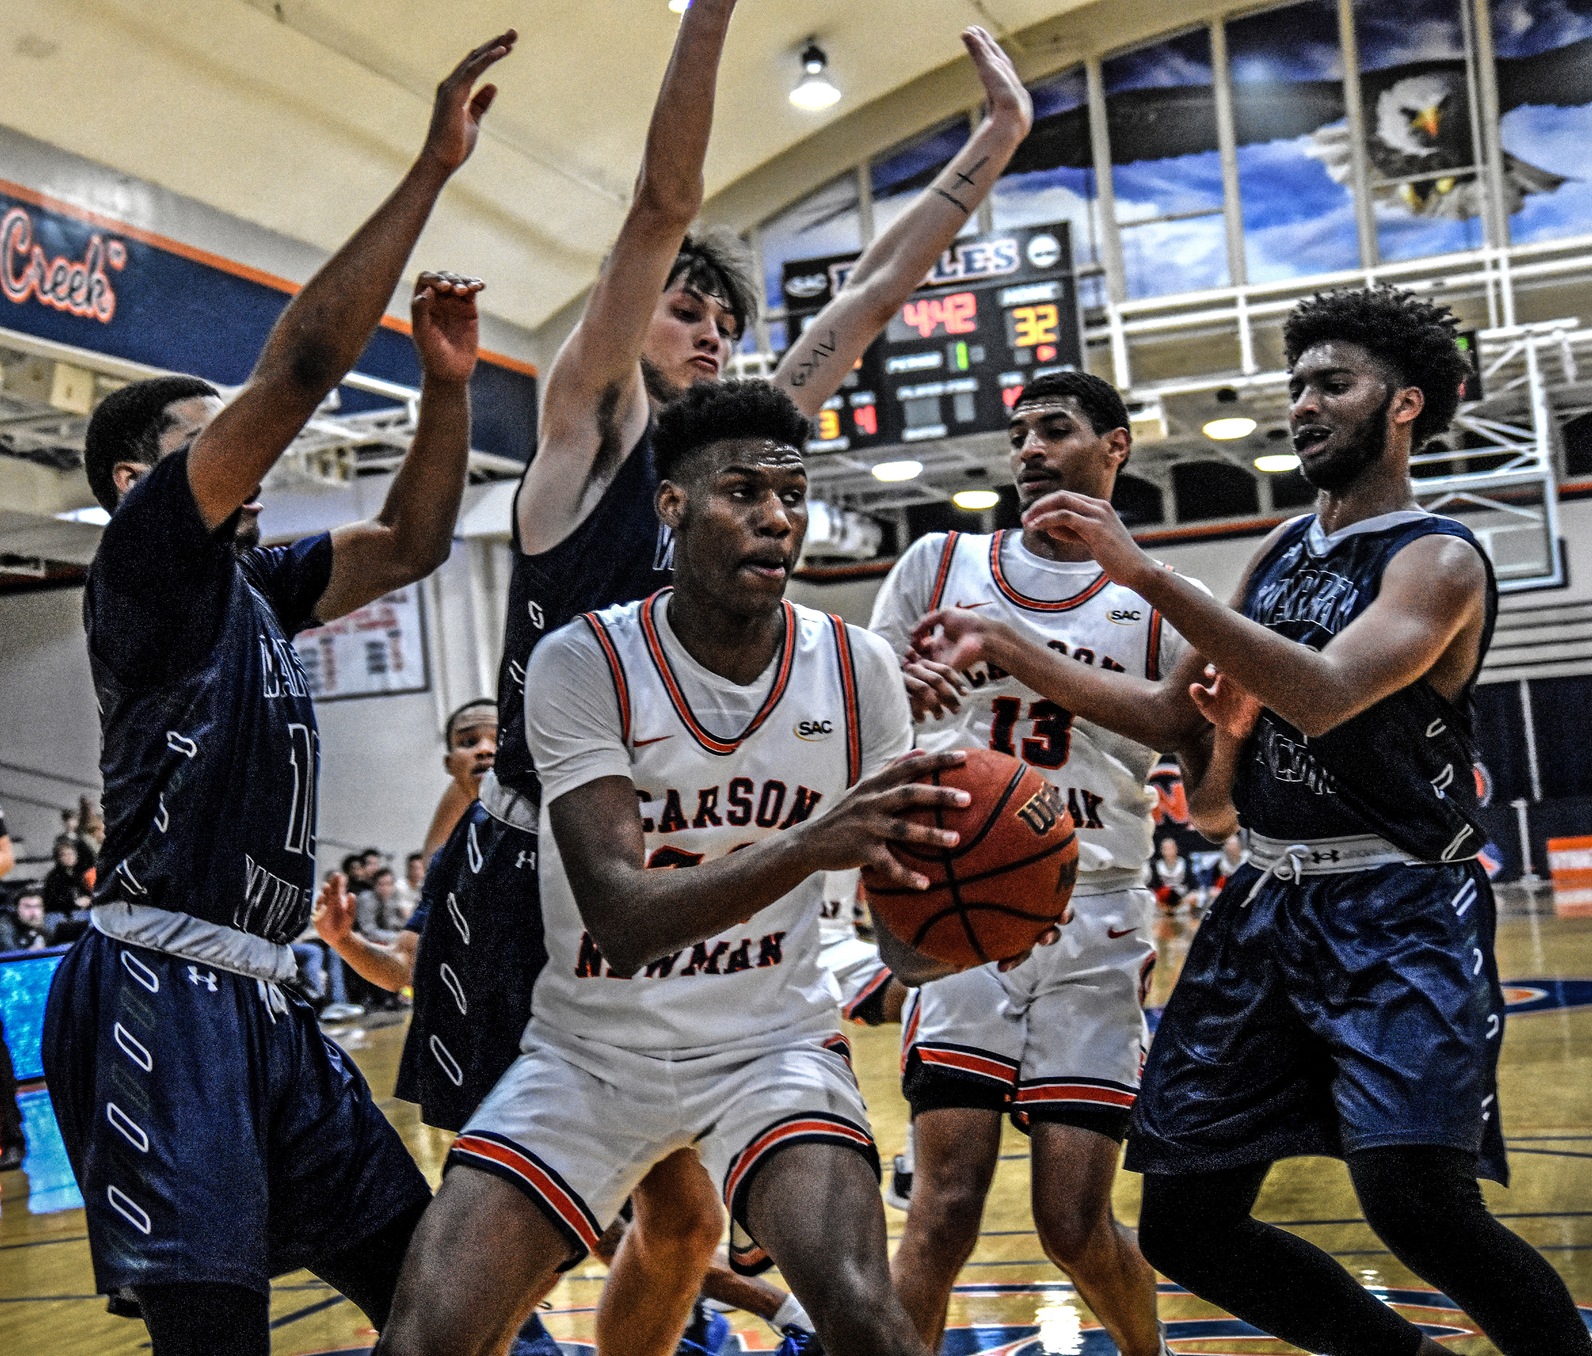 Carson-Newman wraps up 2019 against second-place Mars Hill